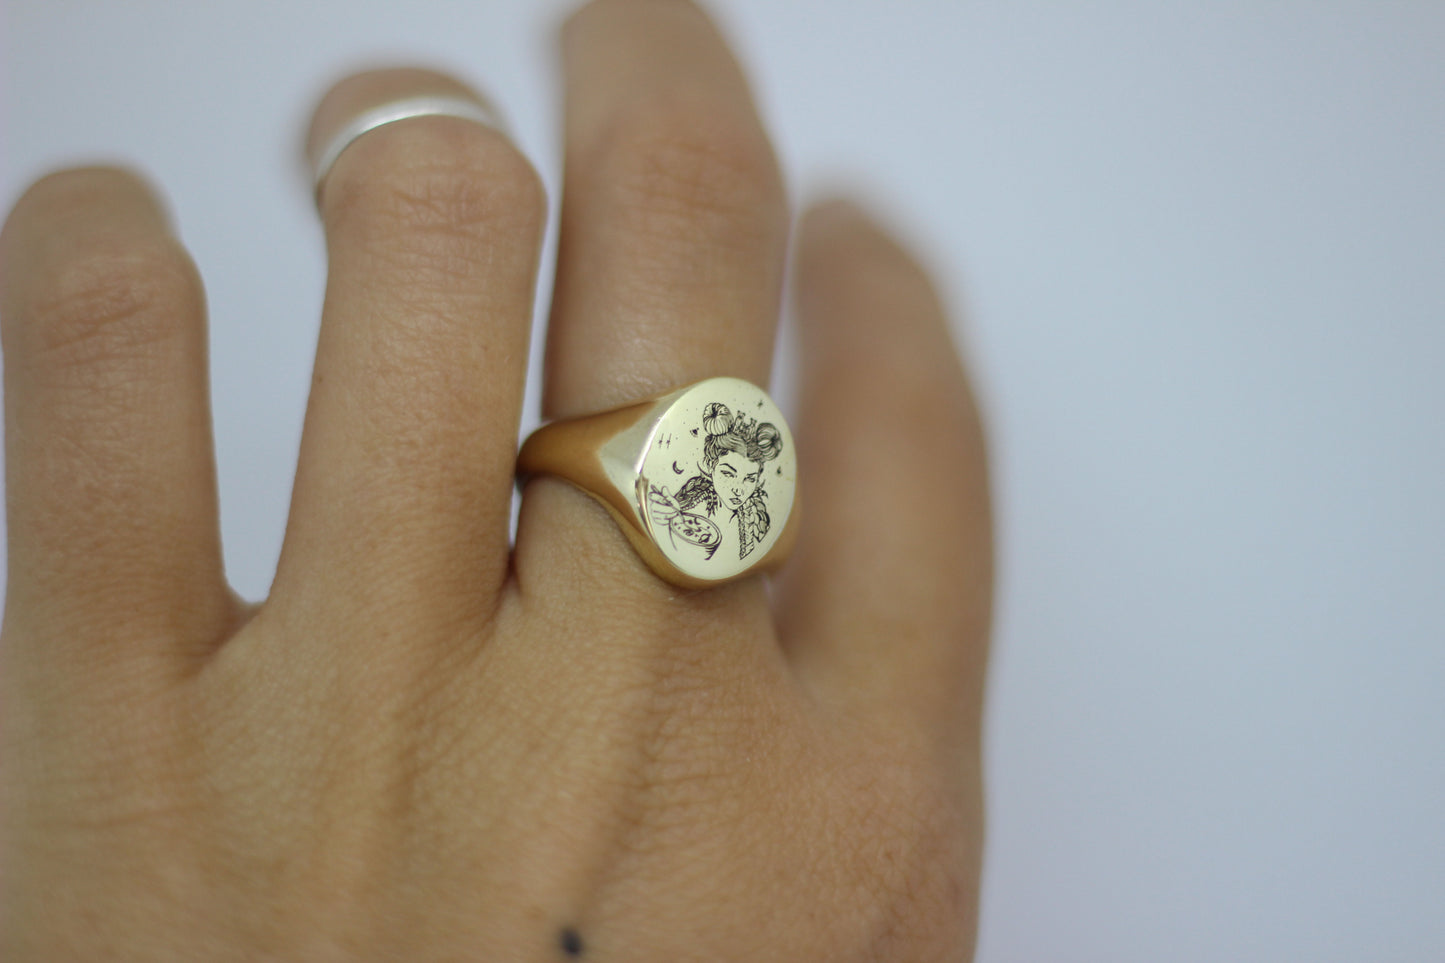 Signet Ring - Large Oval